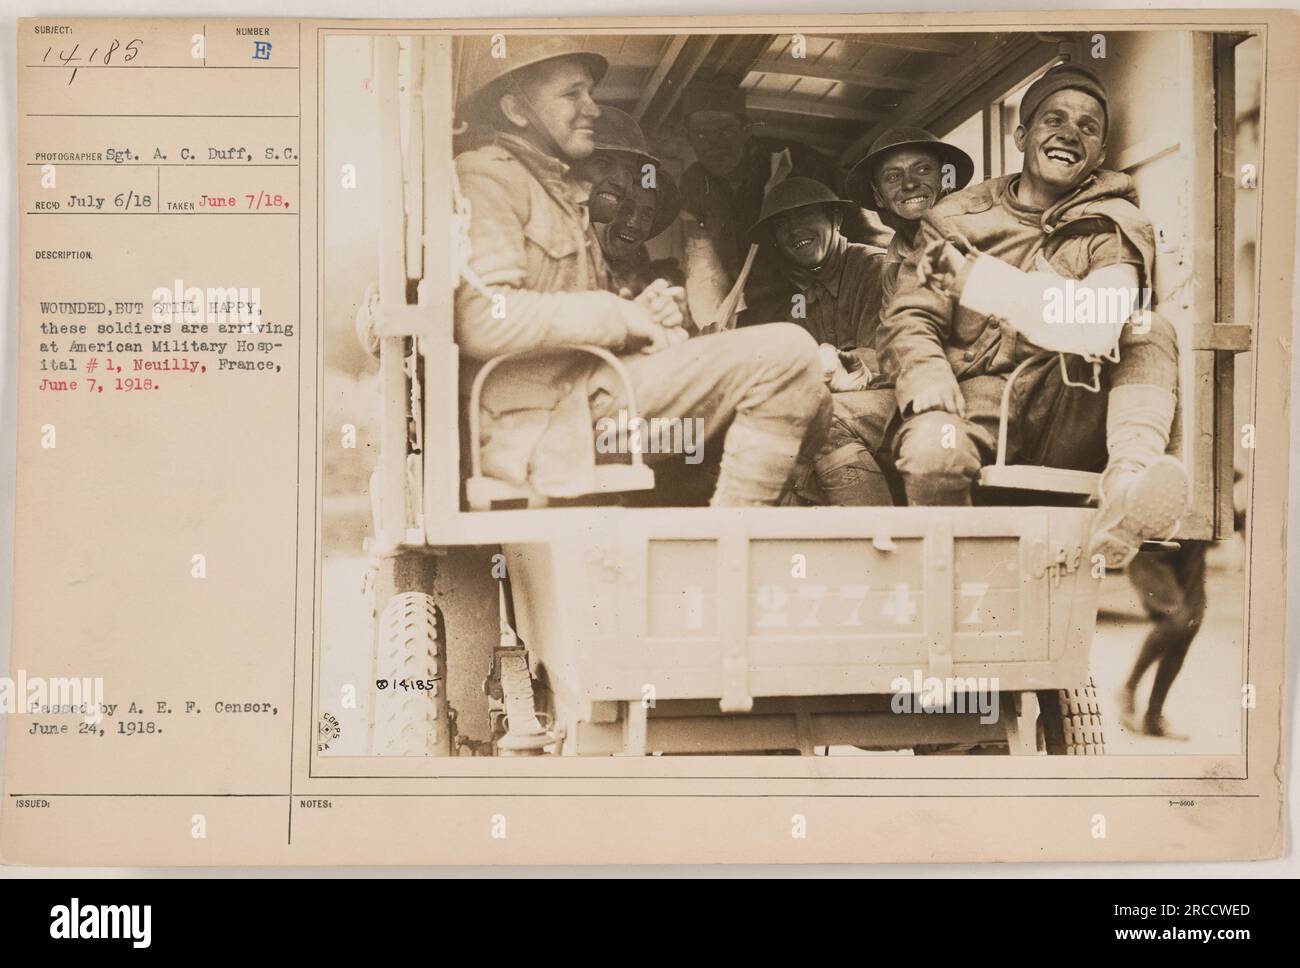 Soldiers arriving at American Military Hospital #1, Neuilly, France, June 7, 1918. Despite being wounded, these soldiers are seen smiling. Photo taken by Sgt. A. C. Duff. Approved by A. E. F. Censor on June 24, 1918. Caption information: 111-SC-14185 | Photographer: Sgt. A. C. Duff, s.c. | Date taken: July 6/18 | Description: E WOUNDED, BUT STILL HAPPY. Stock Photo